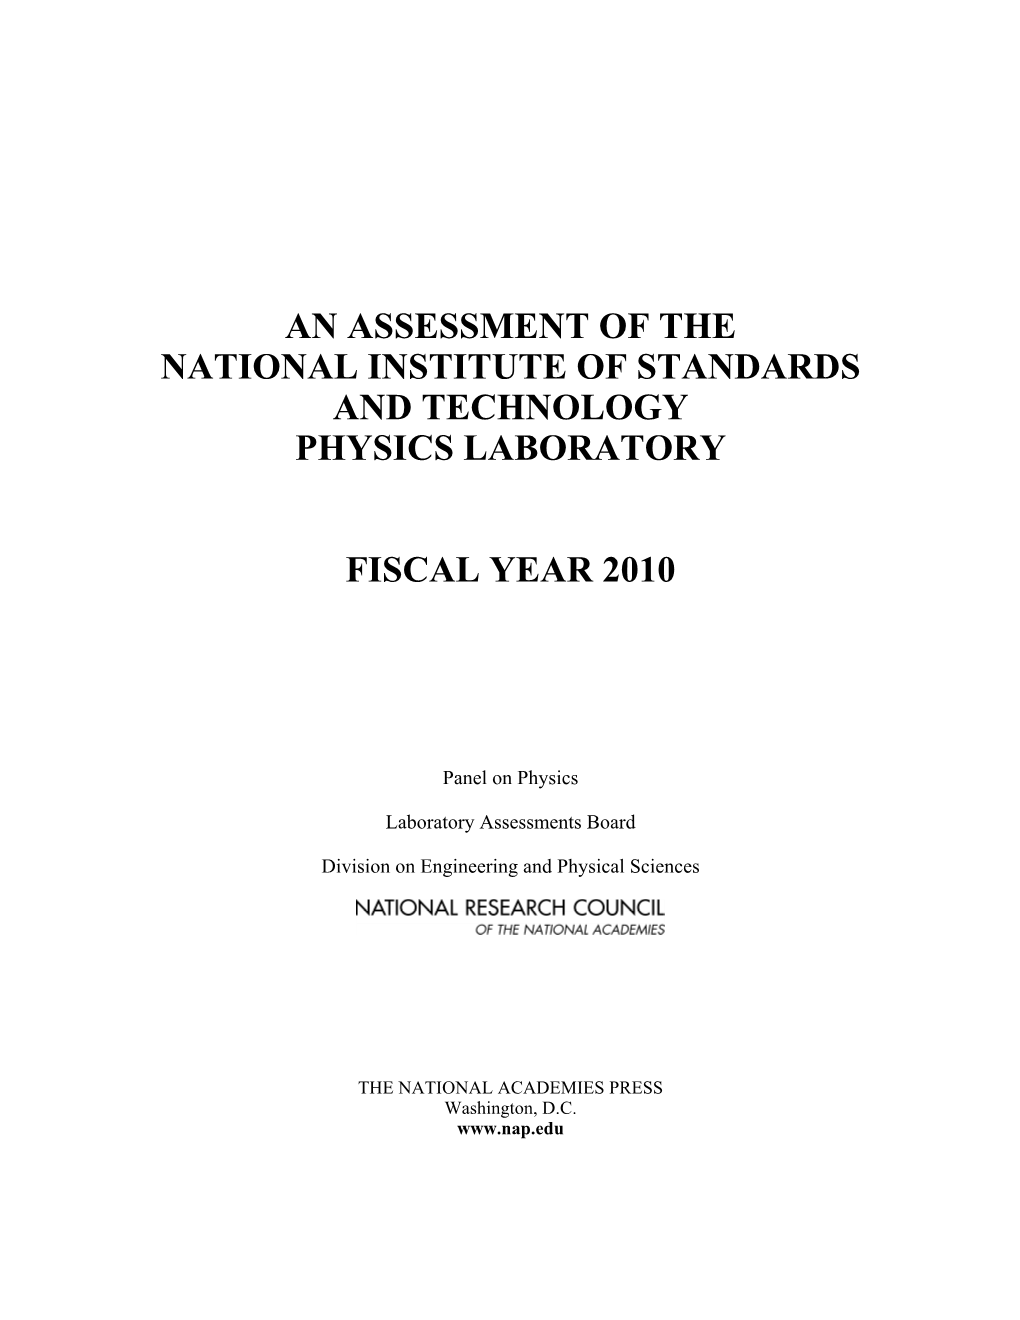 As Assessment of the Physics Laboratory, FY 2010